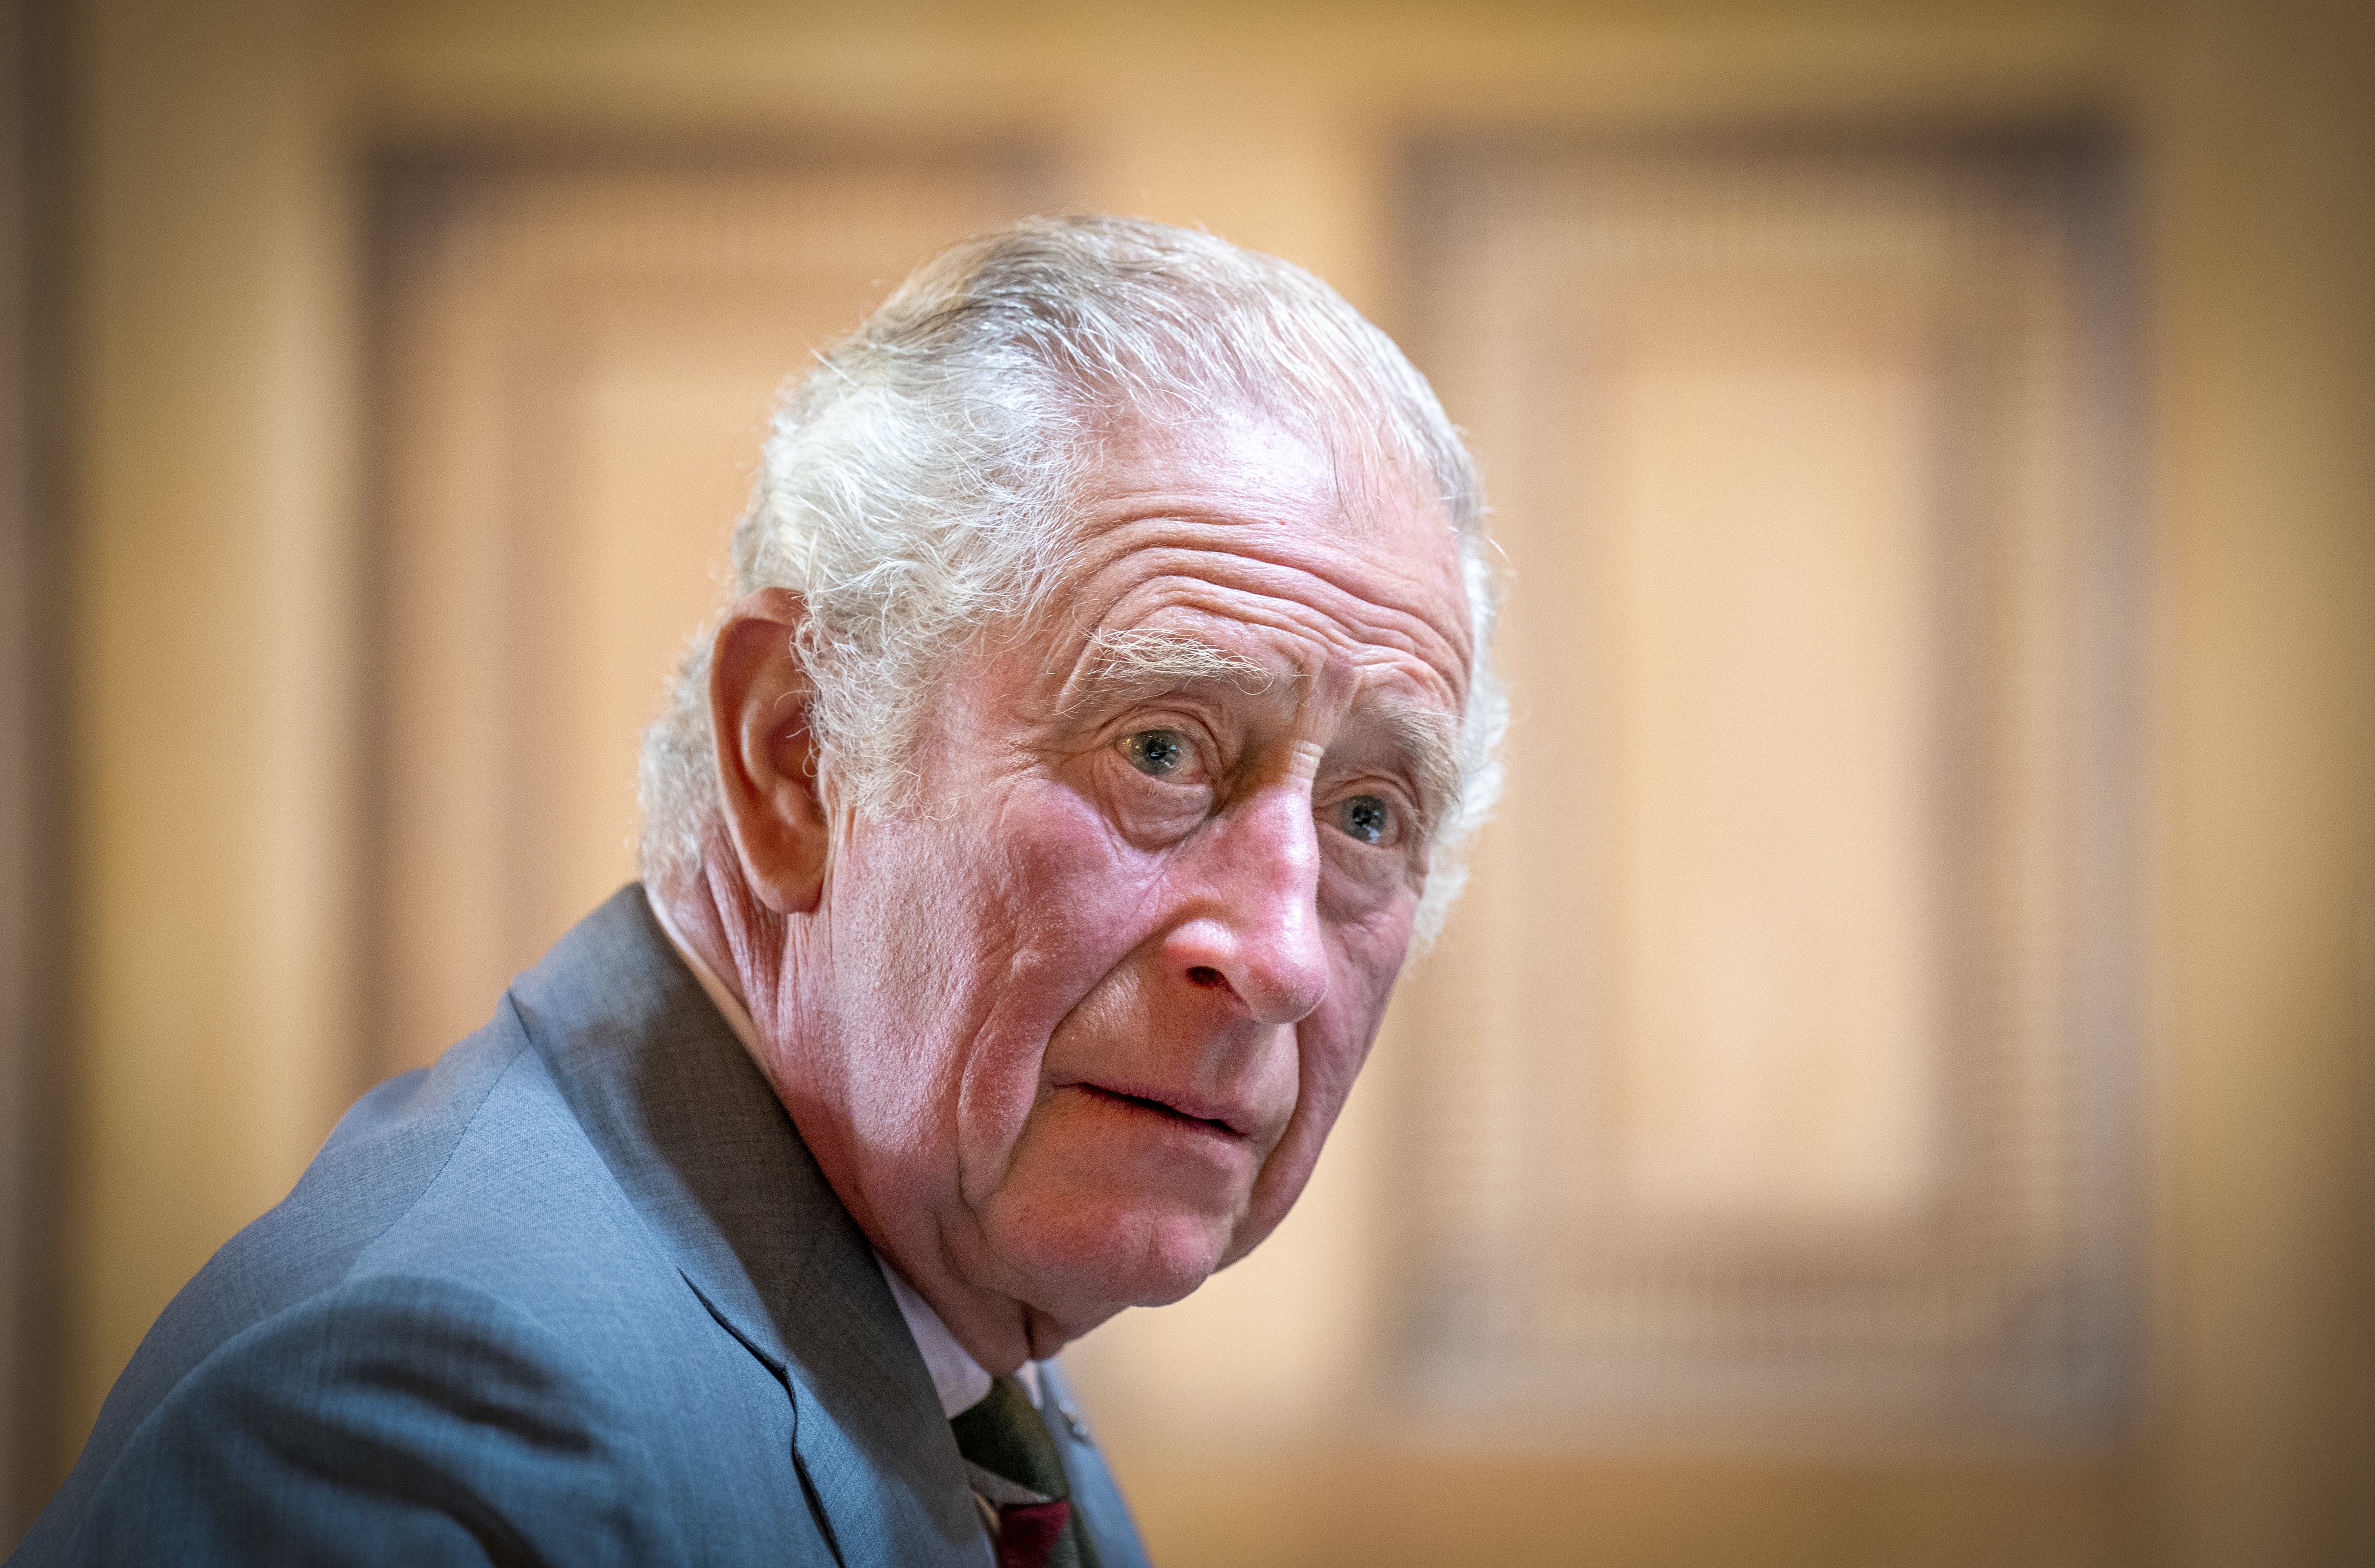 Prince Charles in Scotland, during a roundtable with attendees of the Natasha Allergy Research Foundation seminar at Dumfries House, Cumnock on September 7, 2022, in Lanark, Scotland | Source: Getty Images